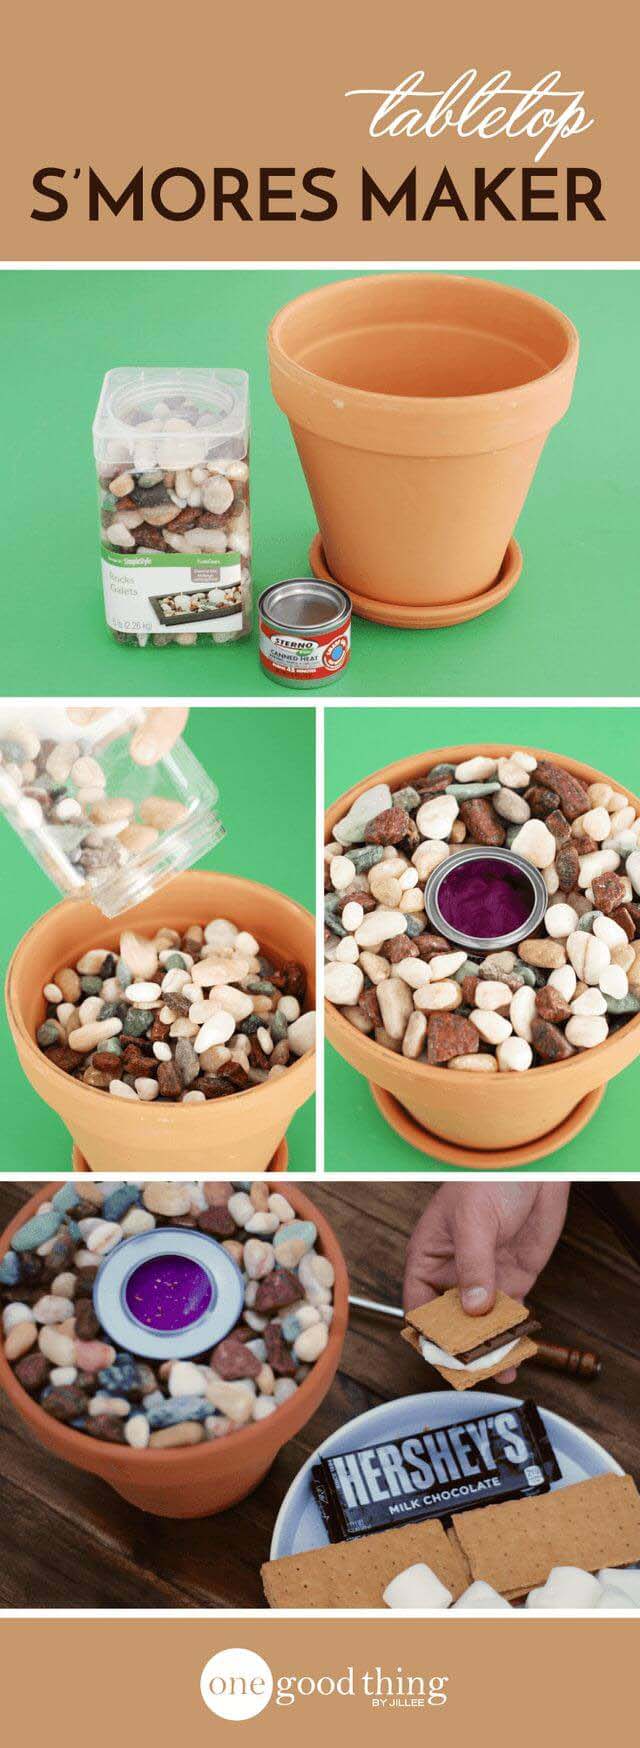 28 Fun Diy Clay Flower Pot Crafts That, How To Make A Fire Pit Out Of Terracotta Pot